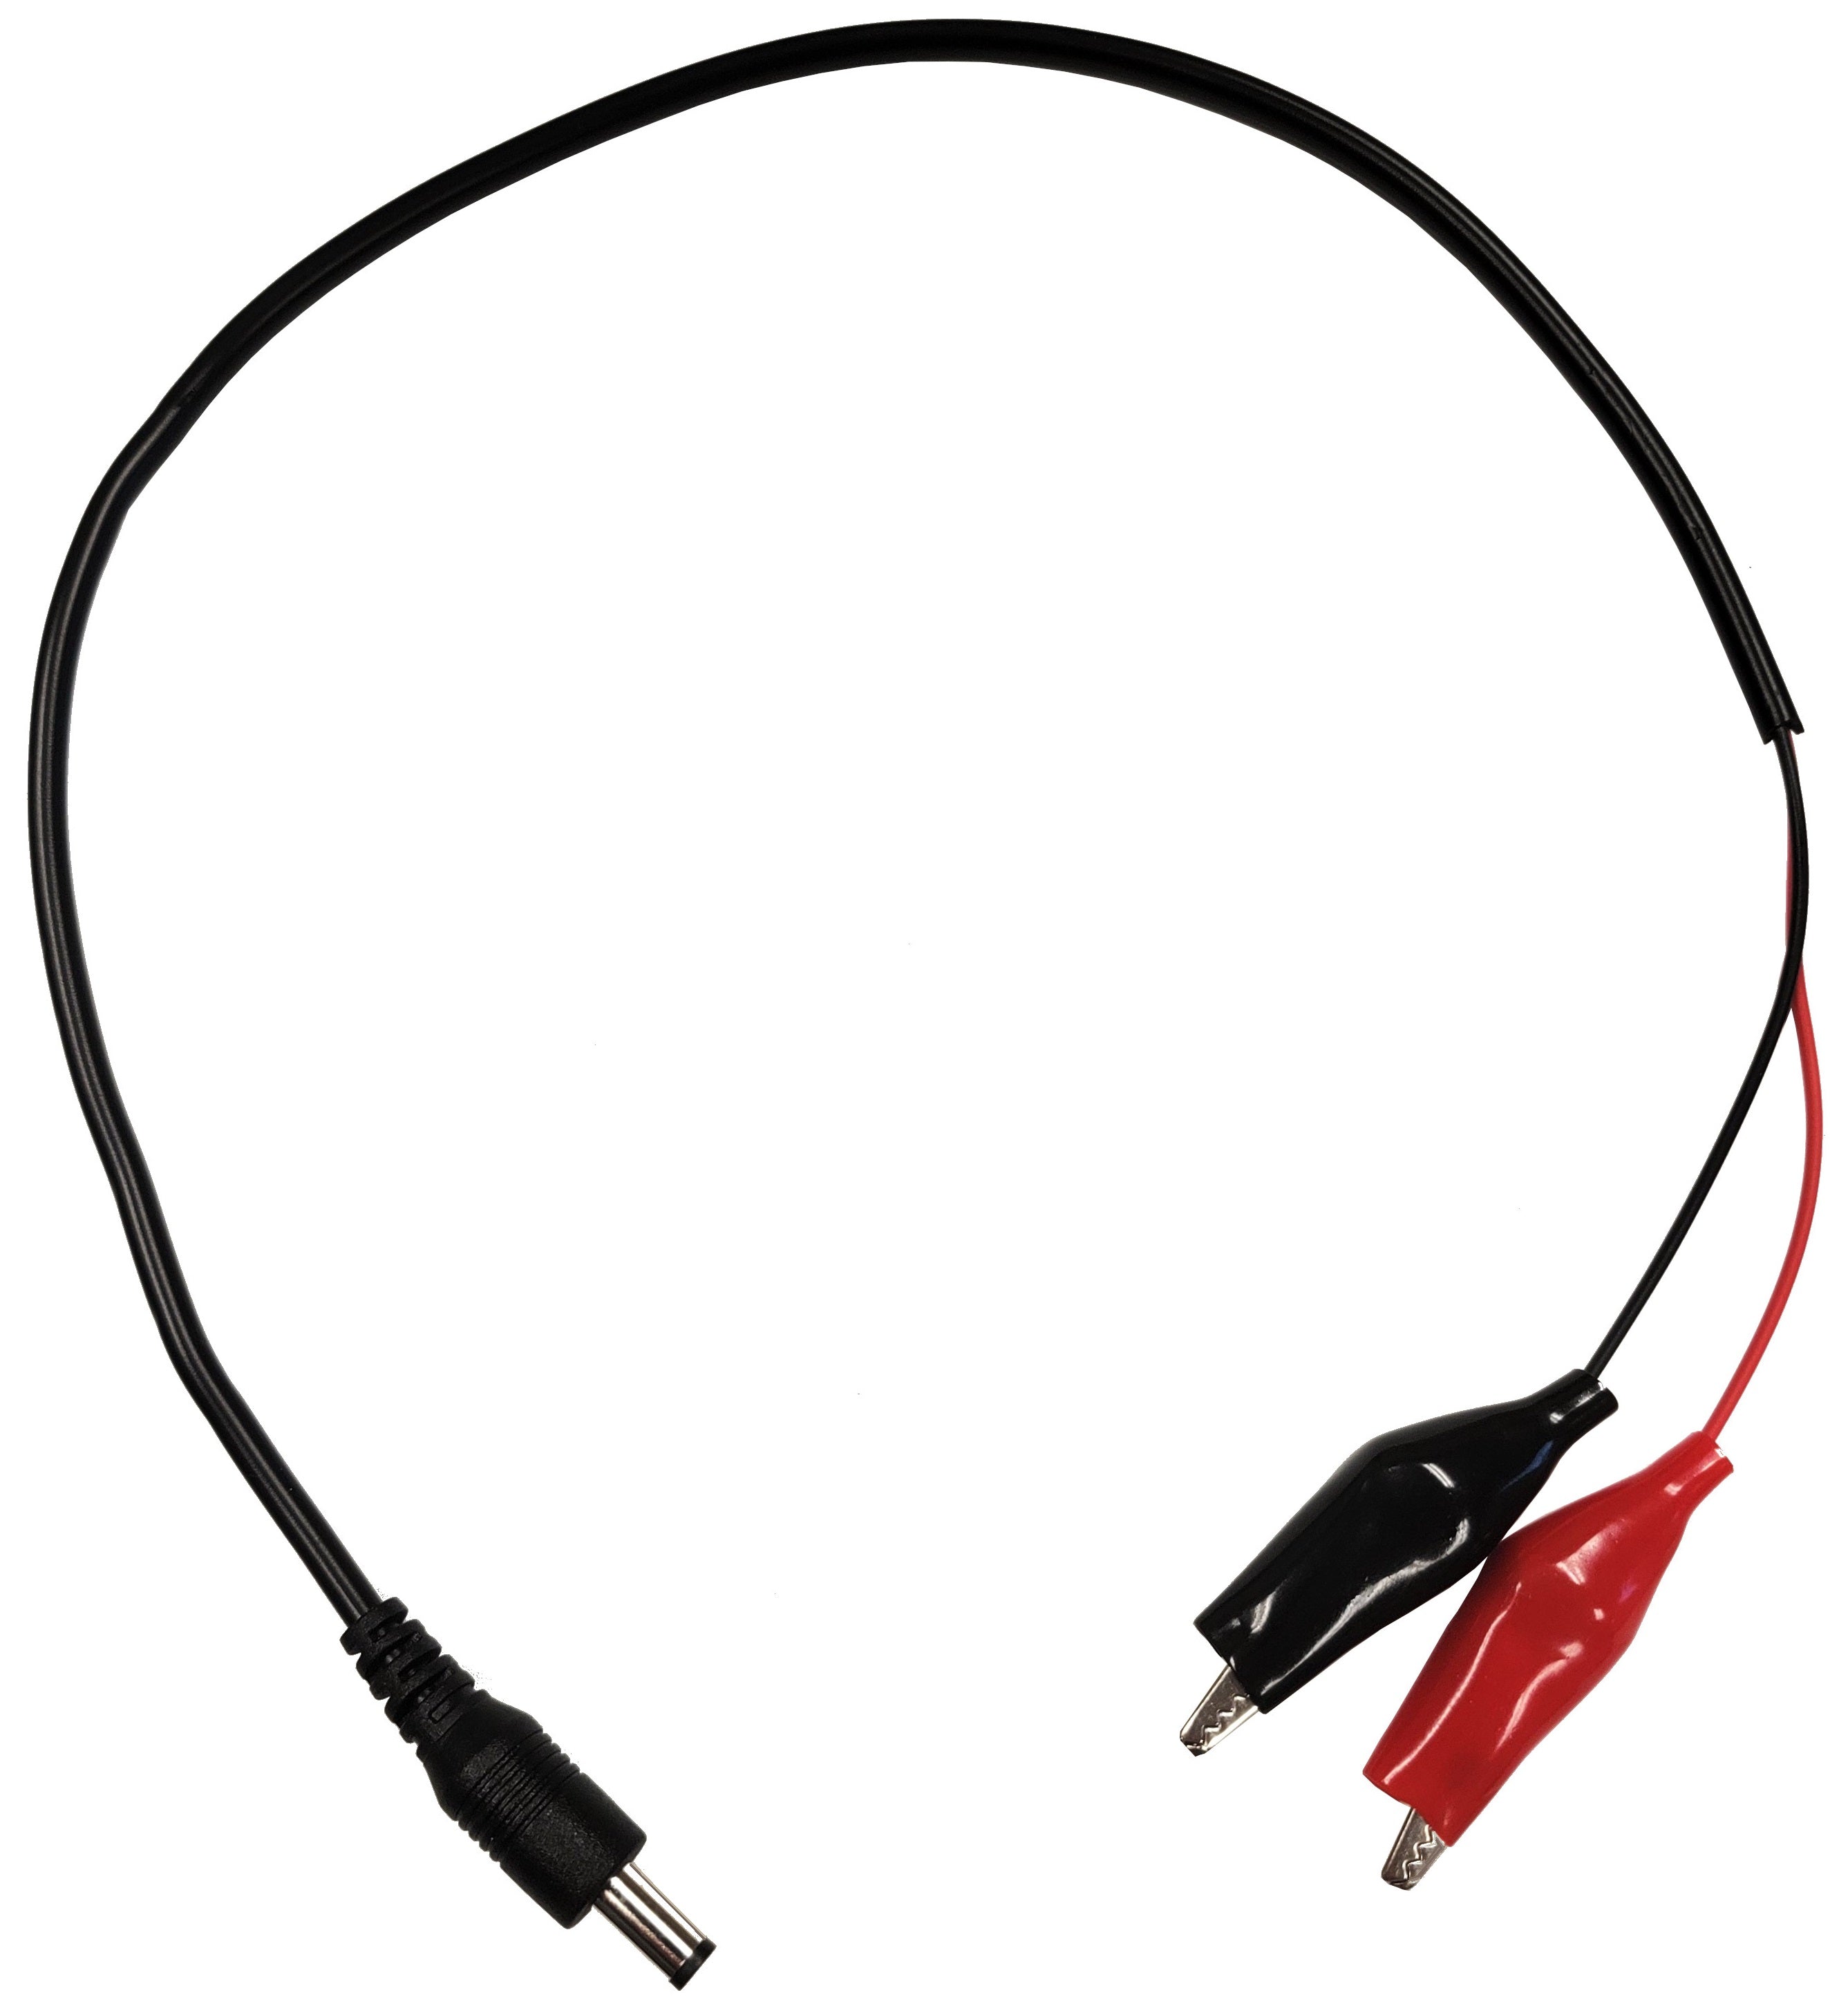 PRO 360 Rite Farm Products Optional 12 Volt Power Supply Cord for Battery or Solar System